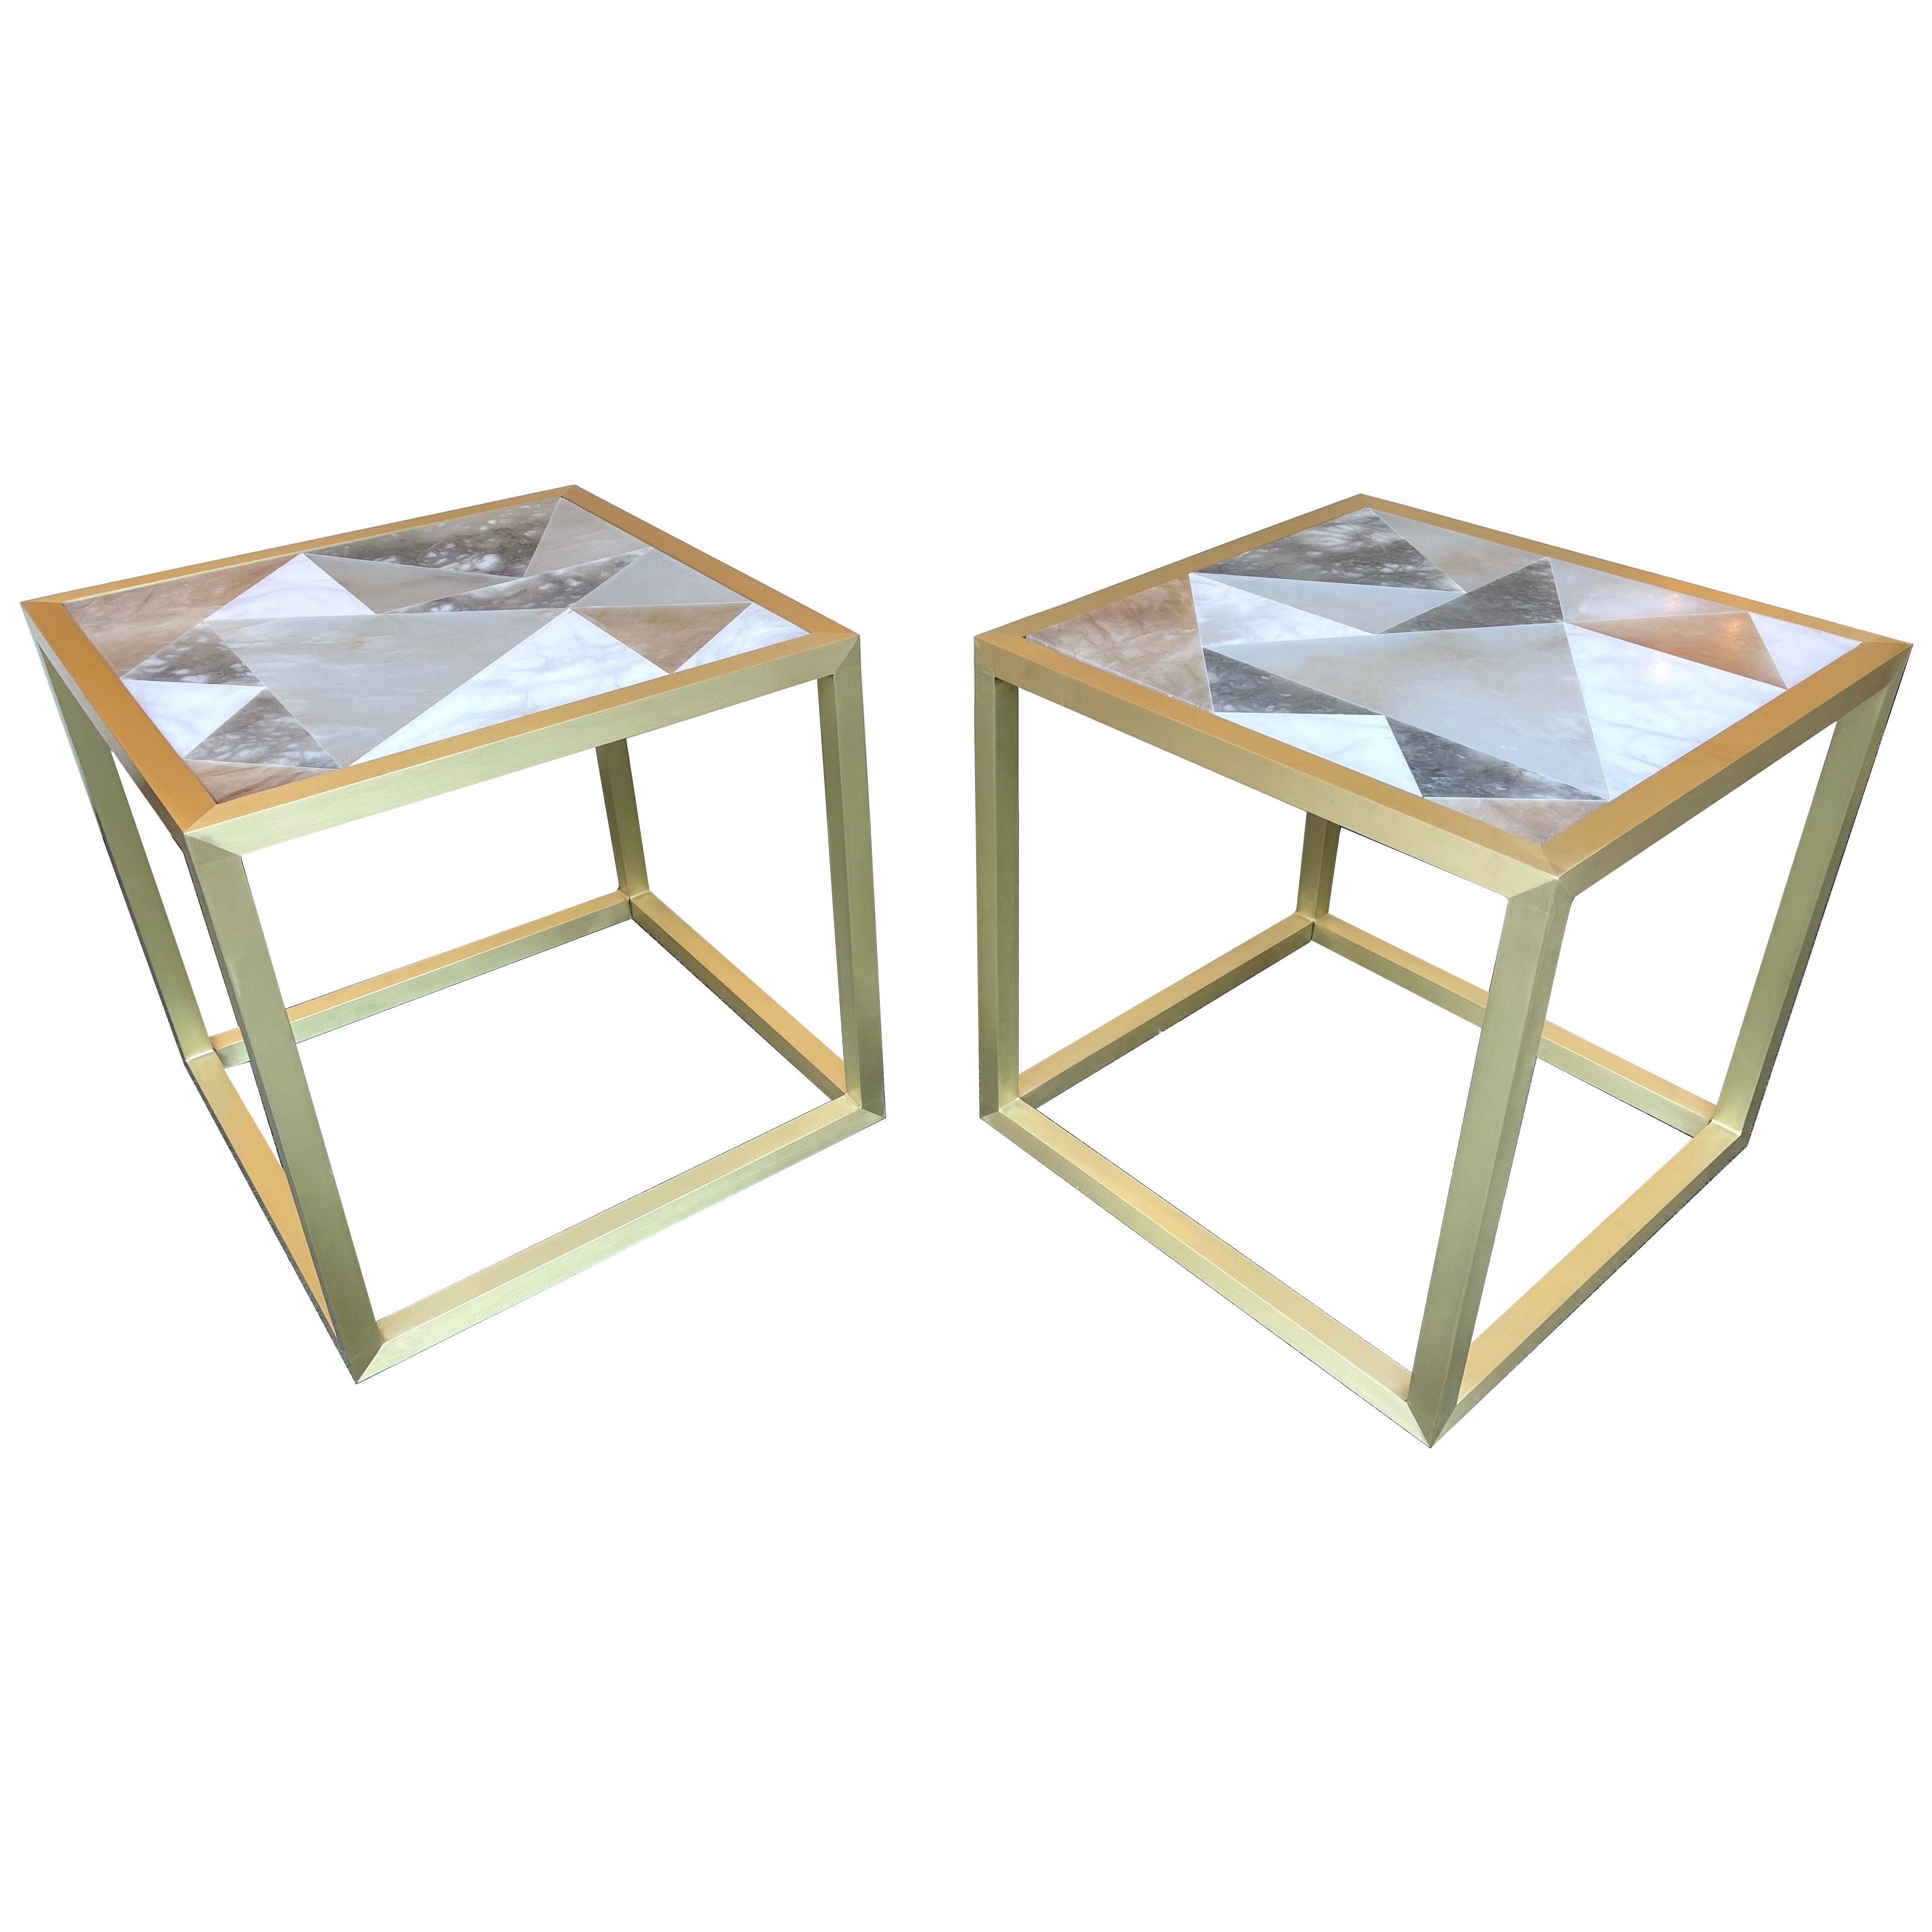 Contemporary Pair of Brass Cube Tables Alabaster by Antonio Cagianelli. Italy